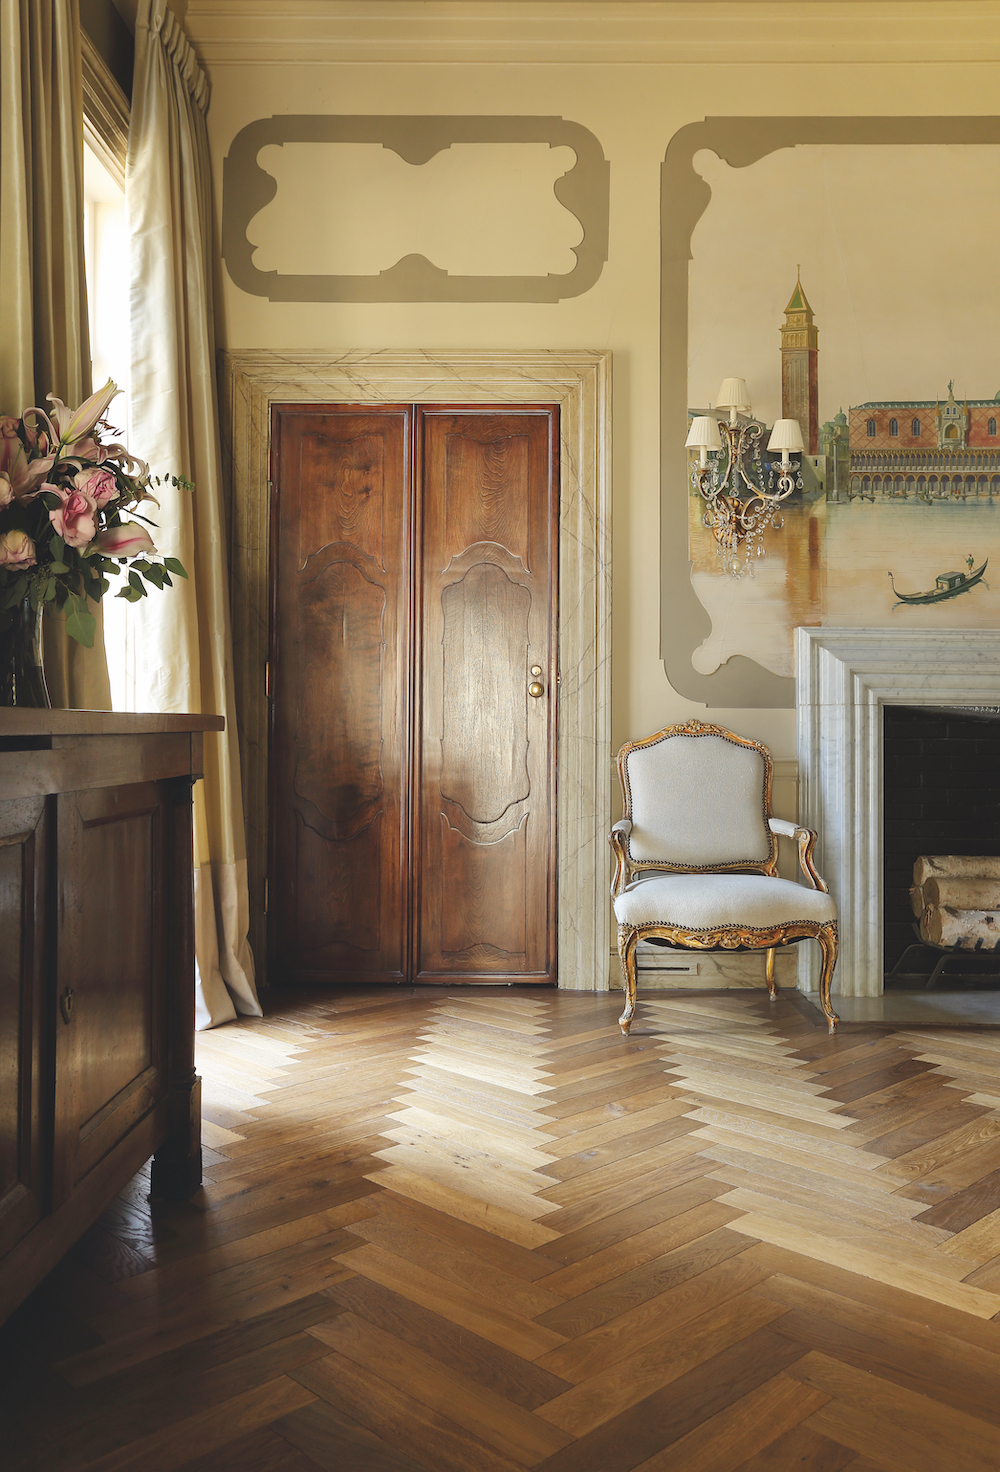 Saint Amour French oak evokes the character and soul of antique French wood floors with its deep, luxurious chestnut browns and custom distressing